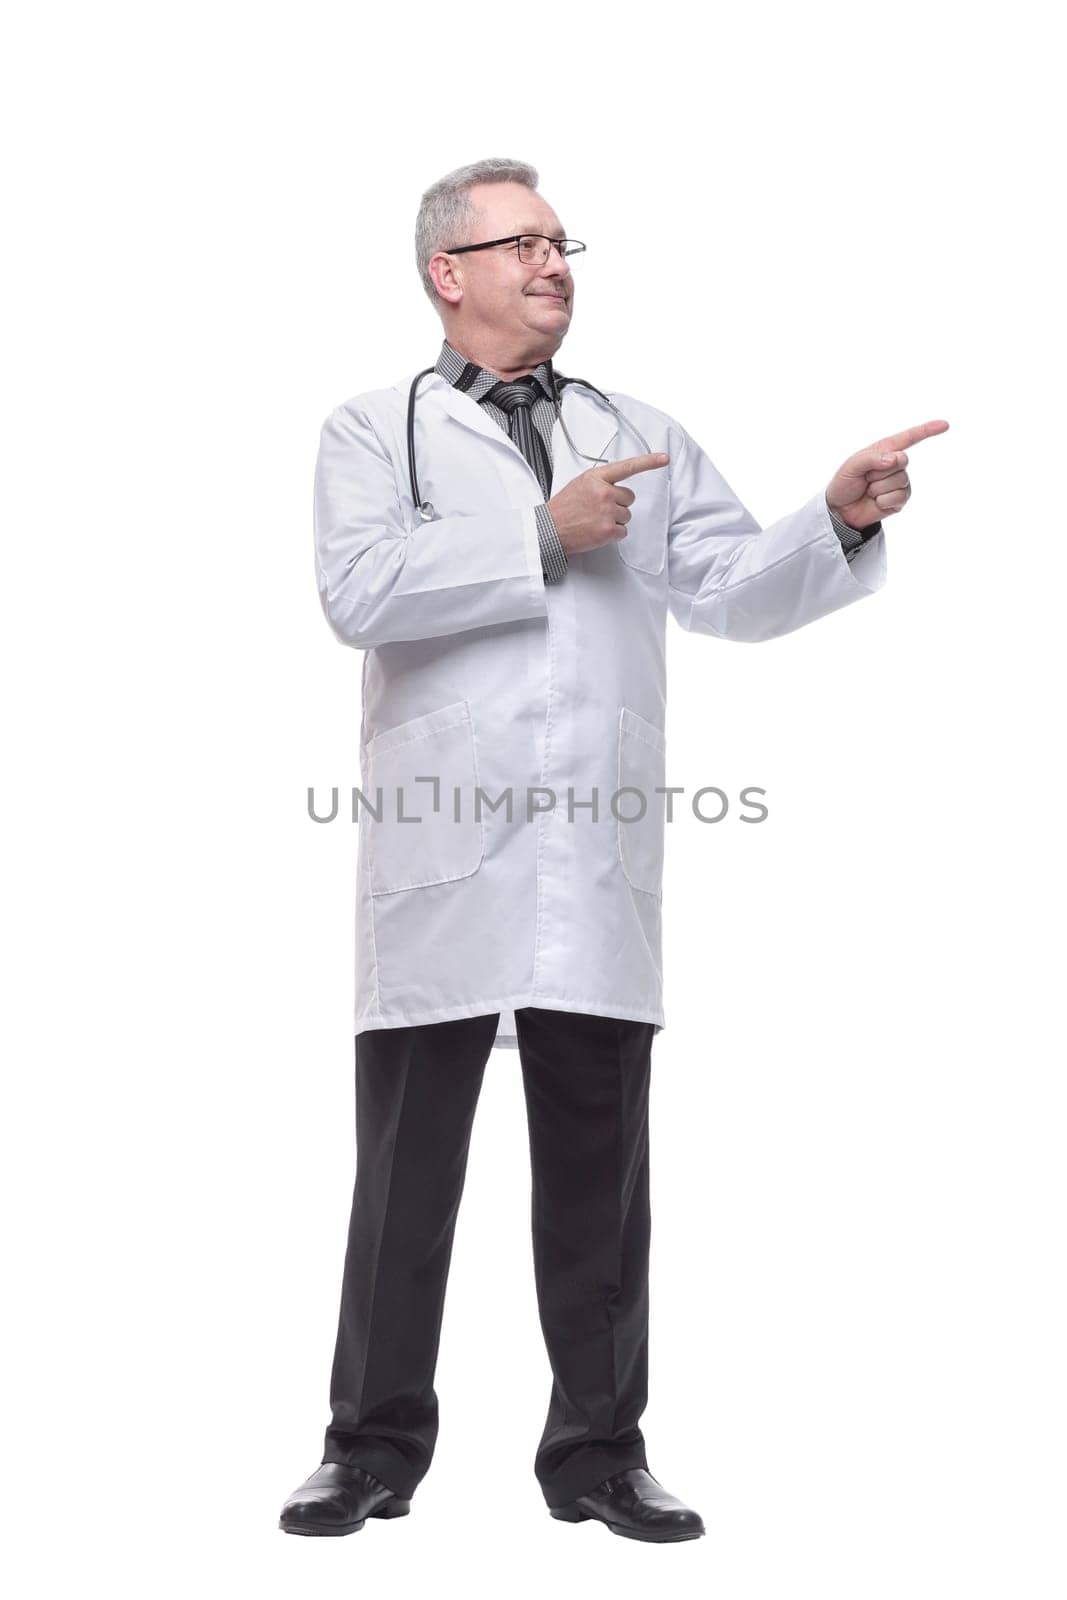 Smiling medical doctor with stethoscope pointed to the side. Isolated over white background